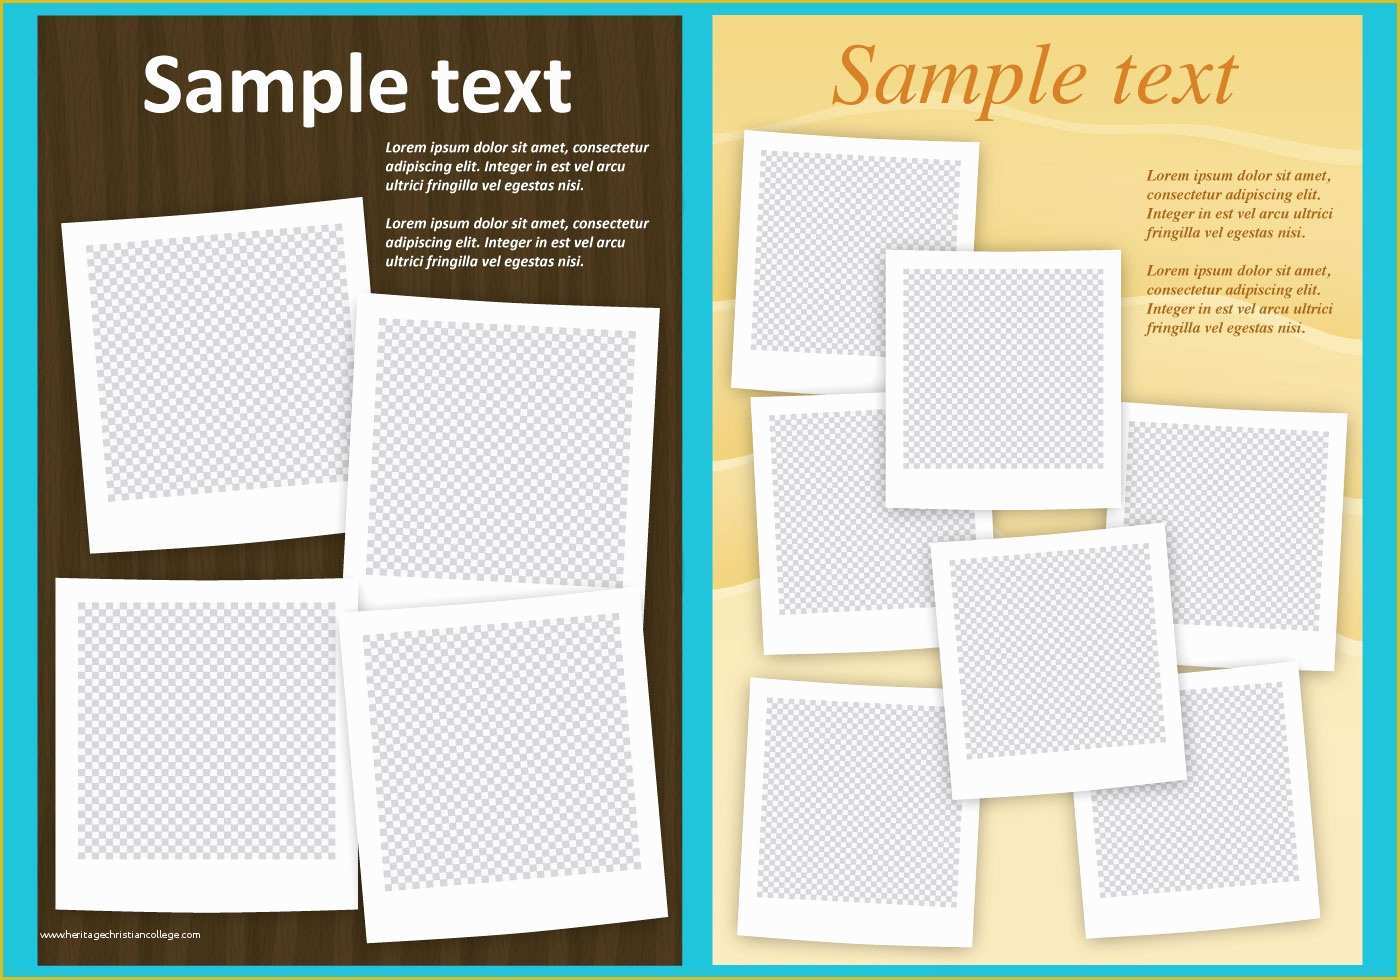 Free Collage Templates Of Collage Templates Download Free Vector Art Stock